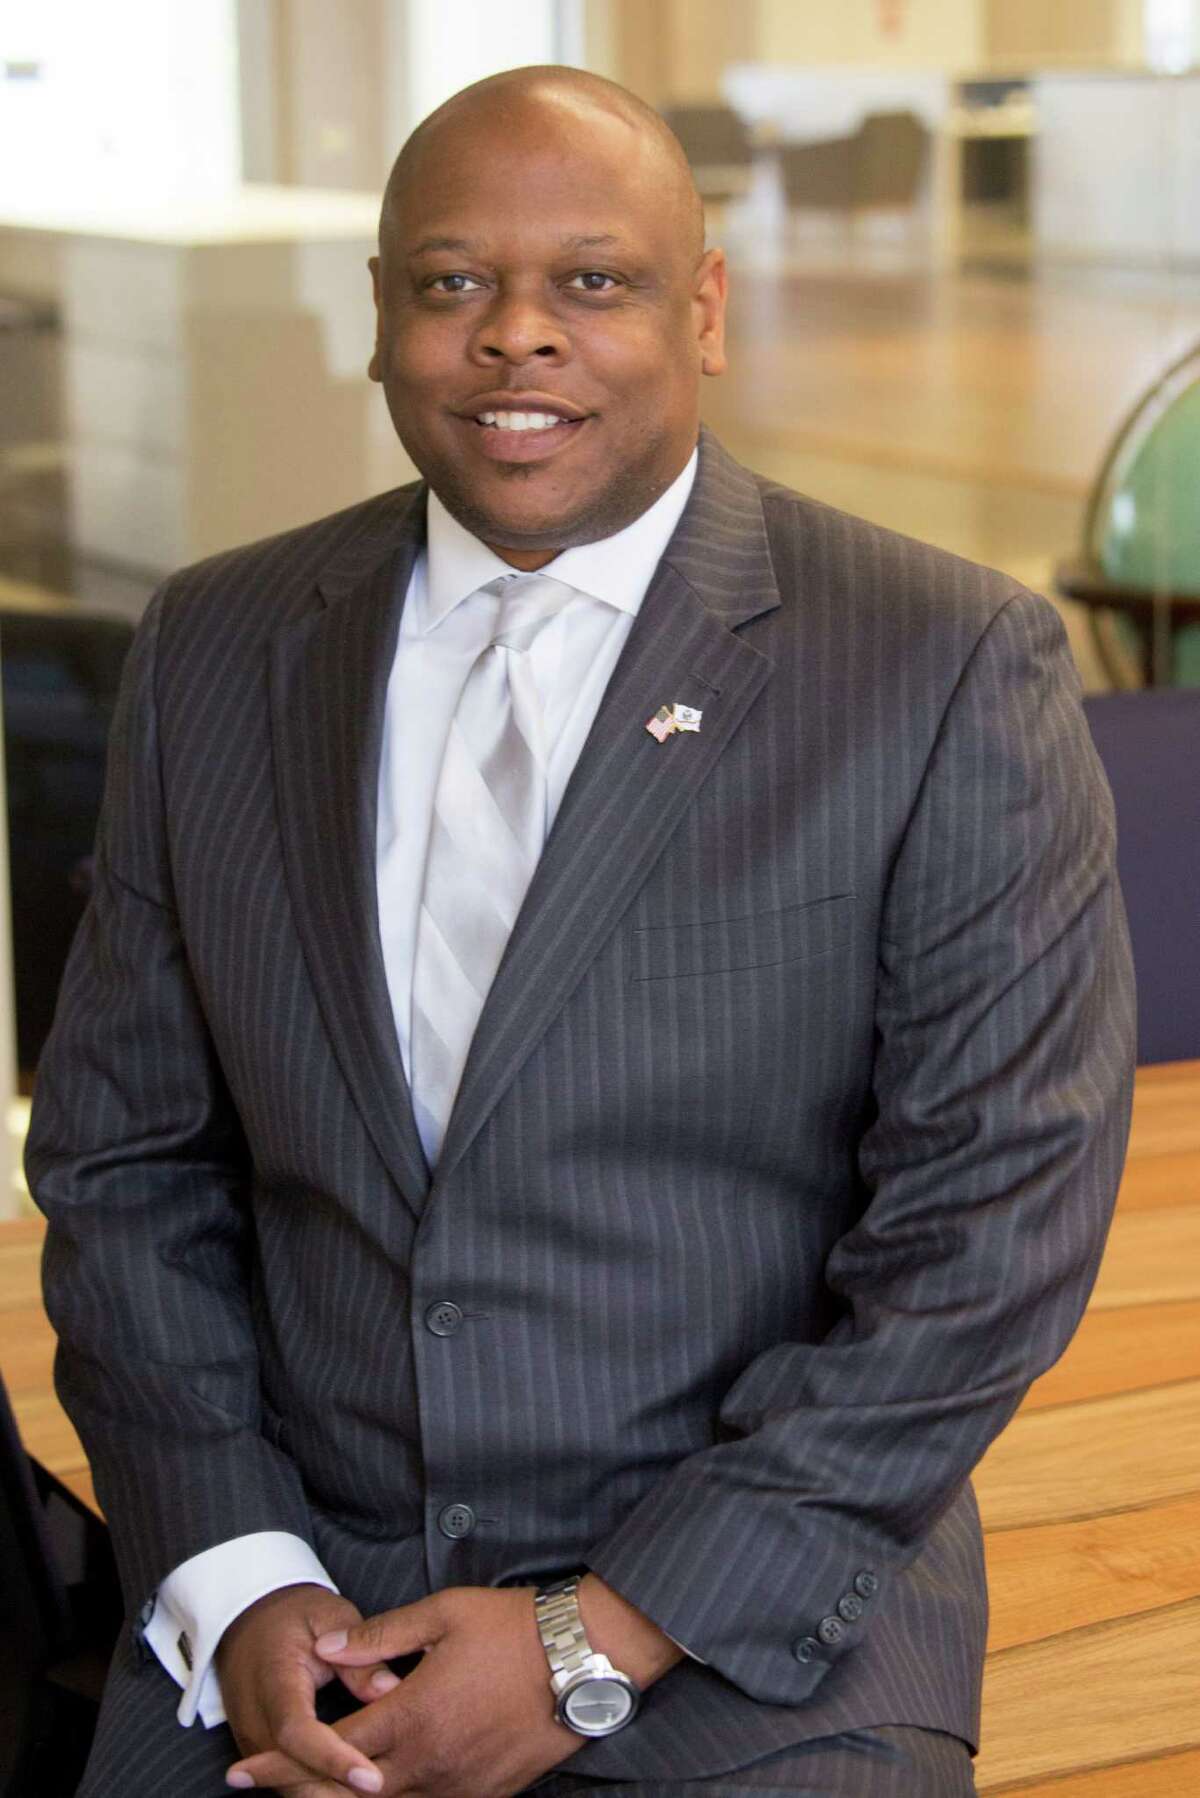 Kevin Fulton is a candidate for Harris County 11th Civil District Court. (JeremyÂ CarterÂ / Houston Chronicle